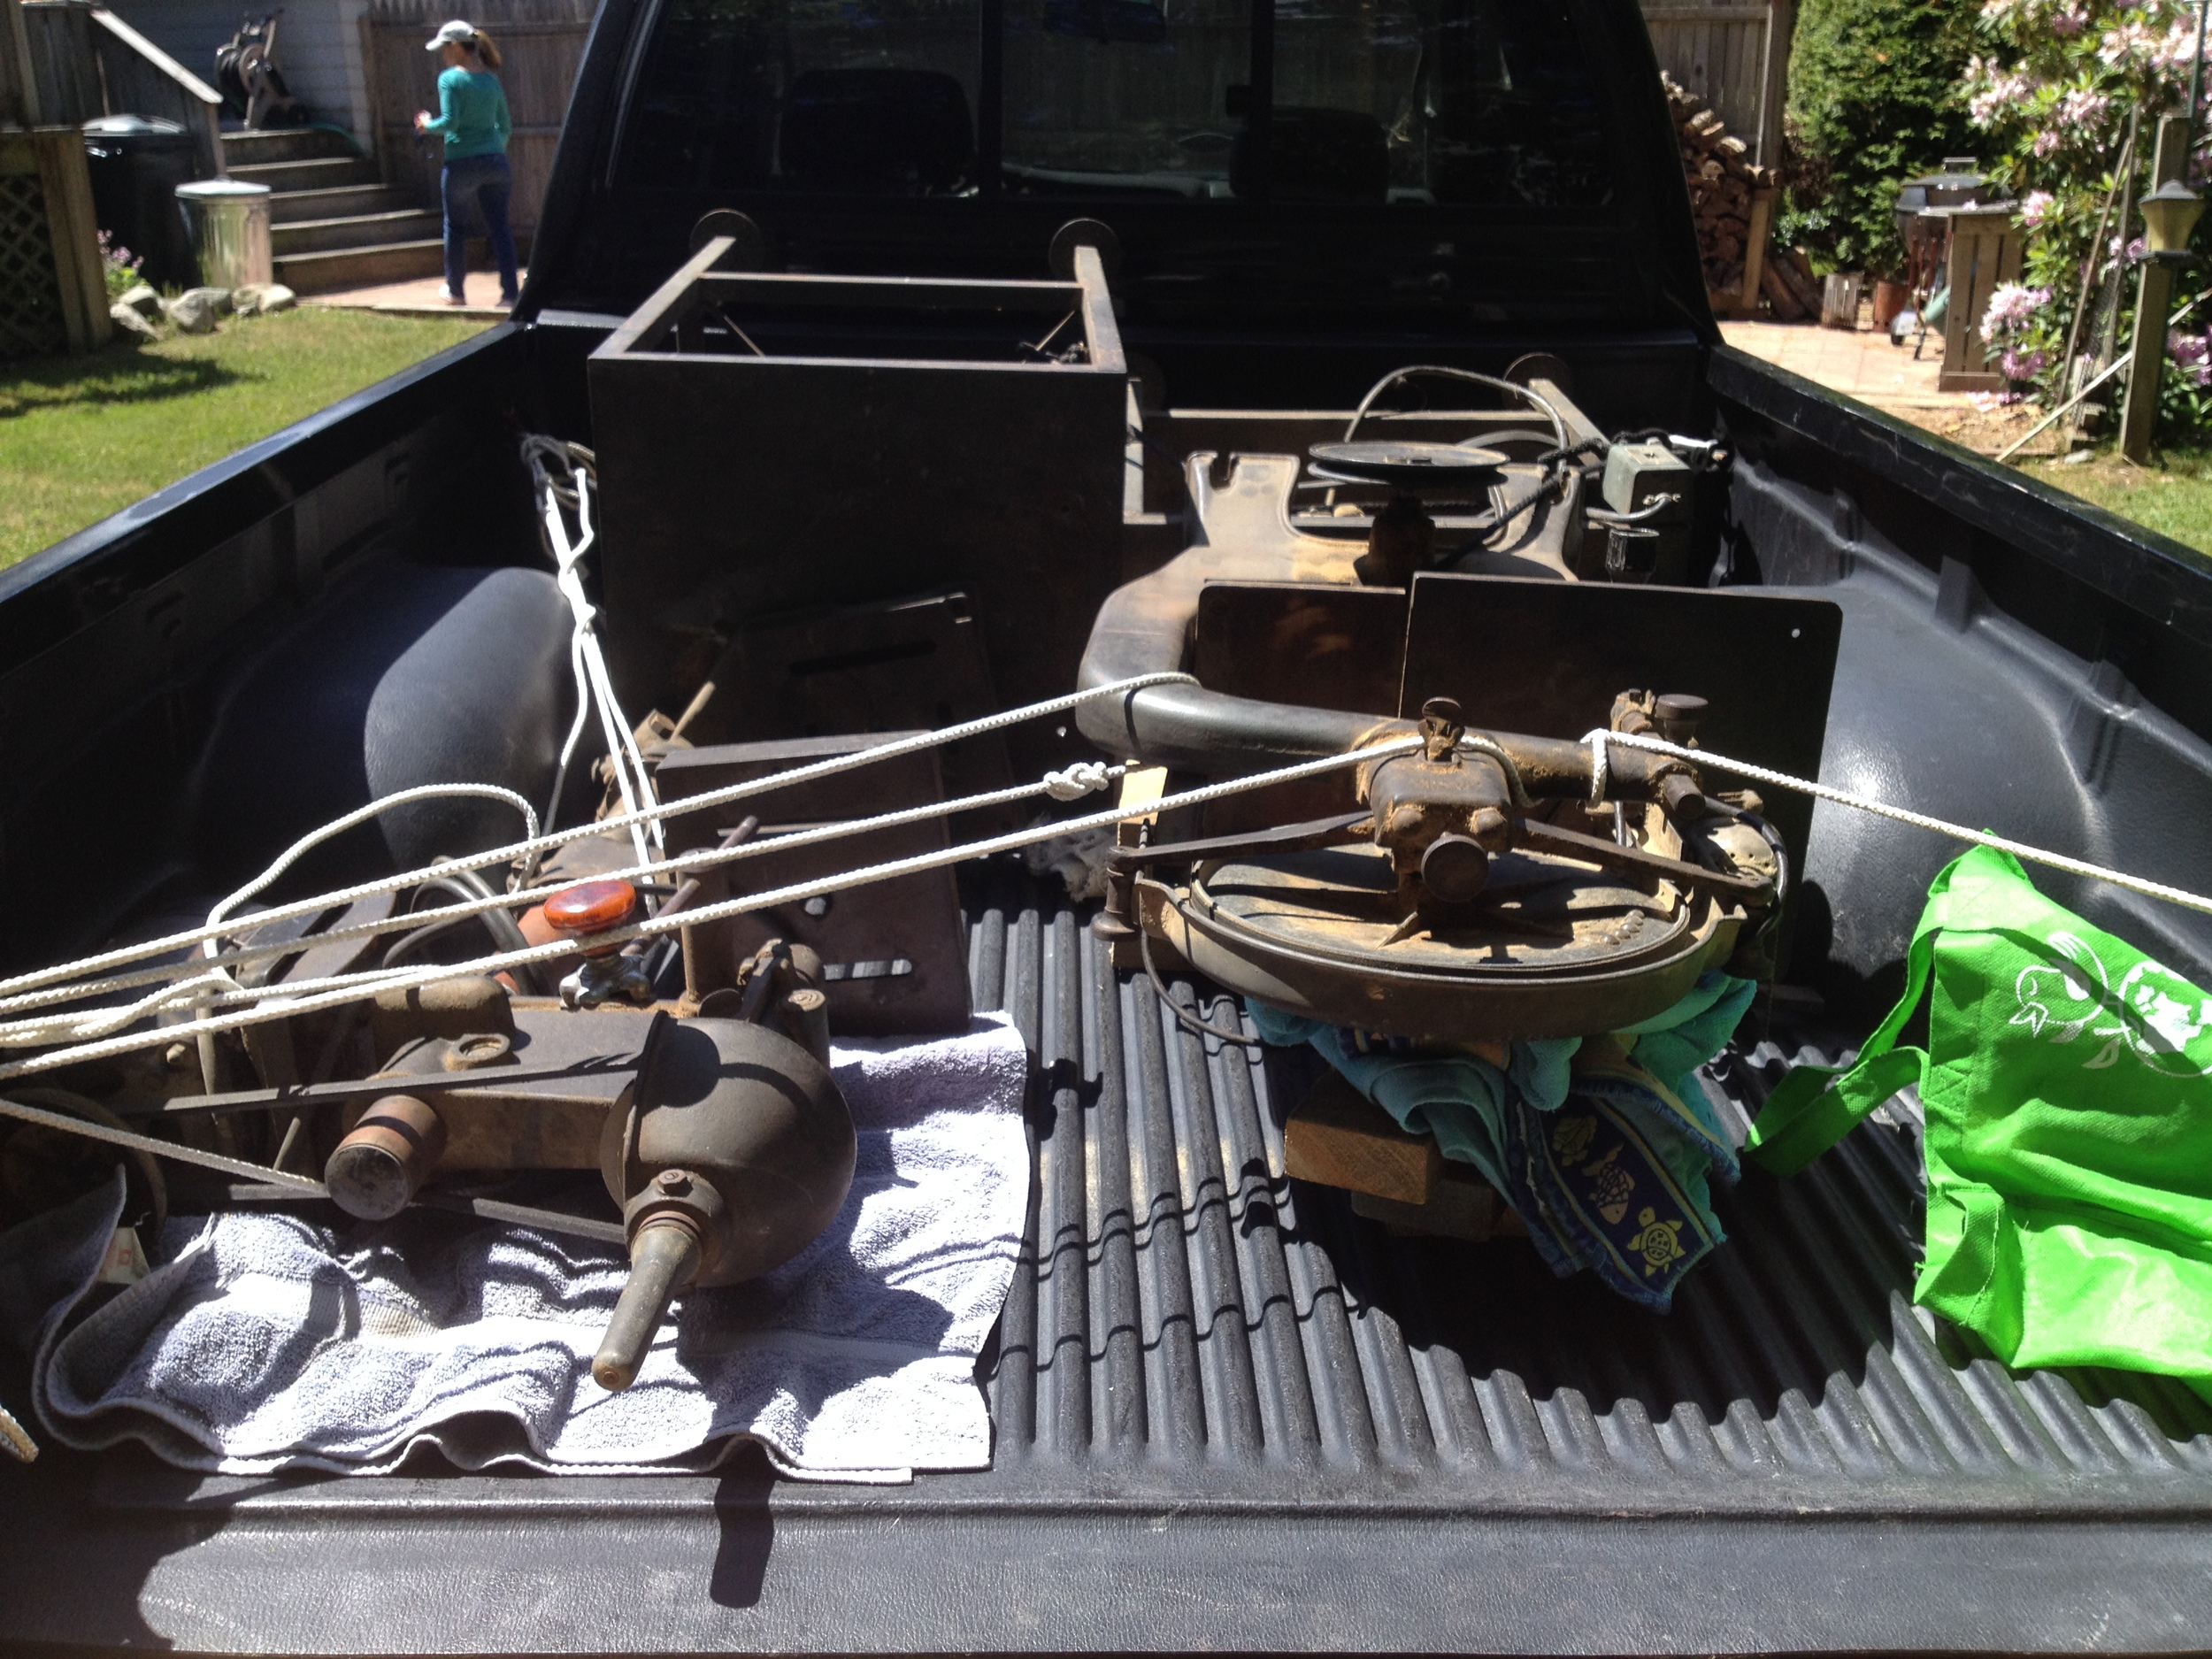  Matching Walker Turner drill press and band saw arriving home. 